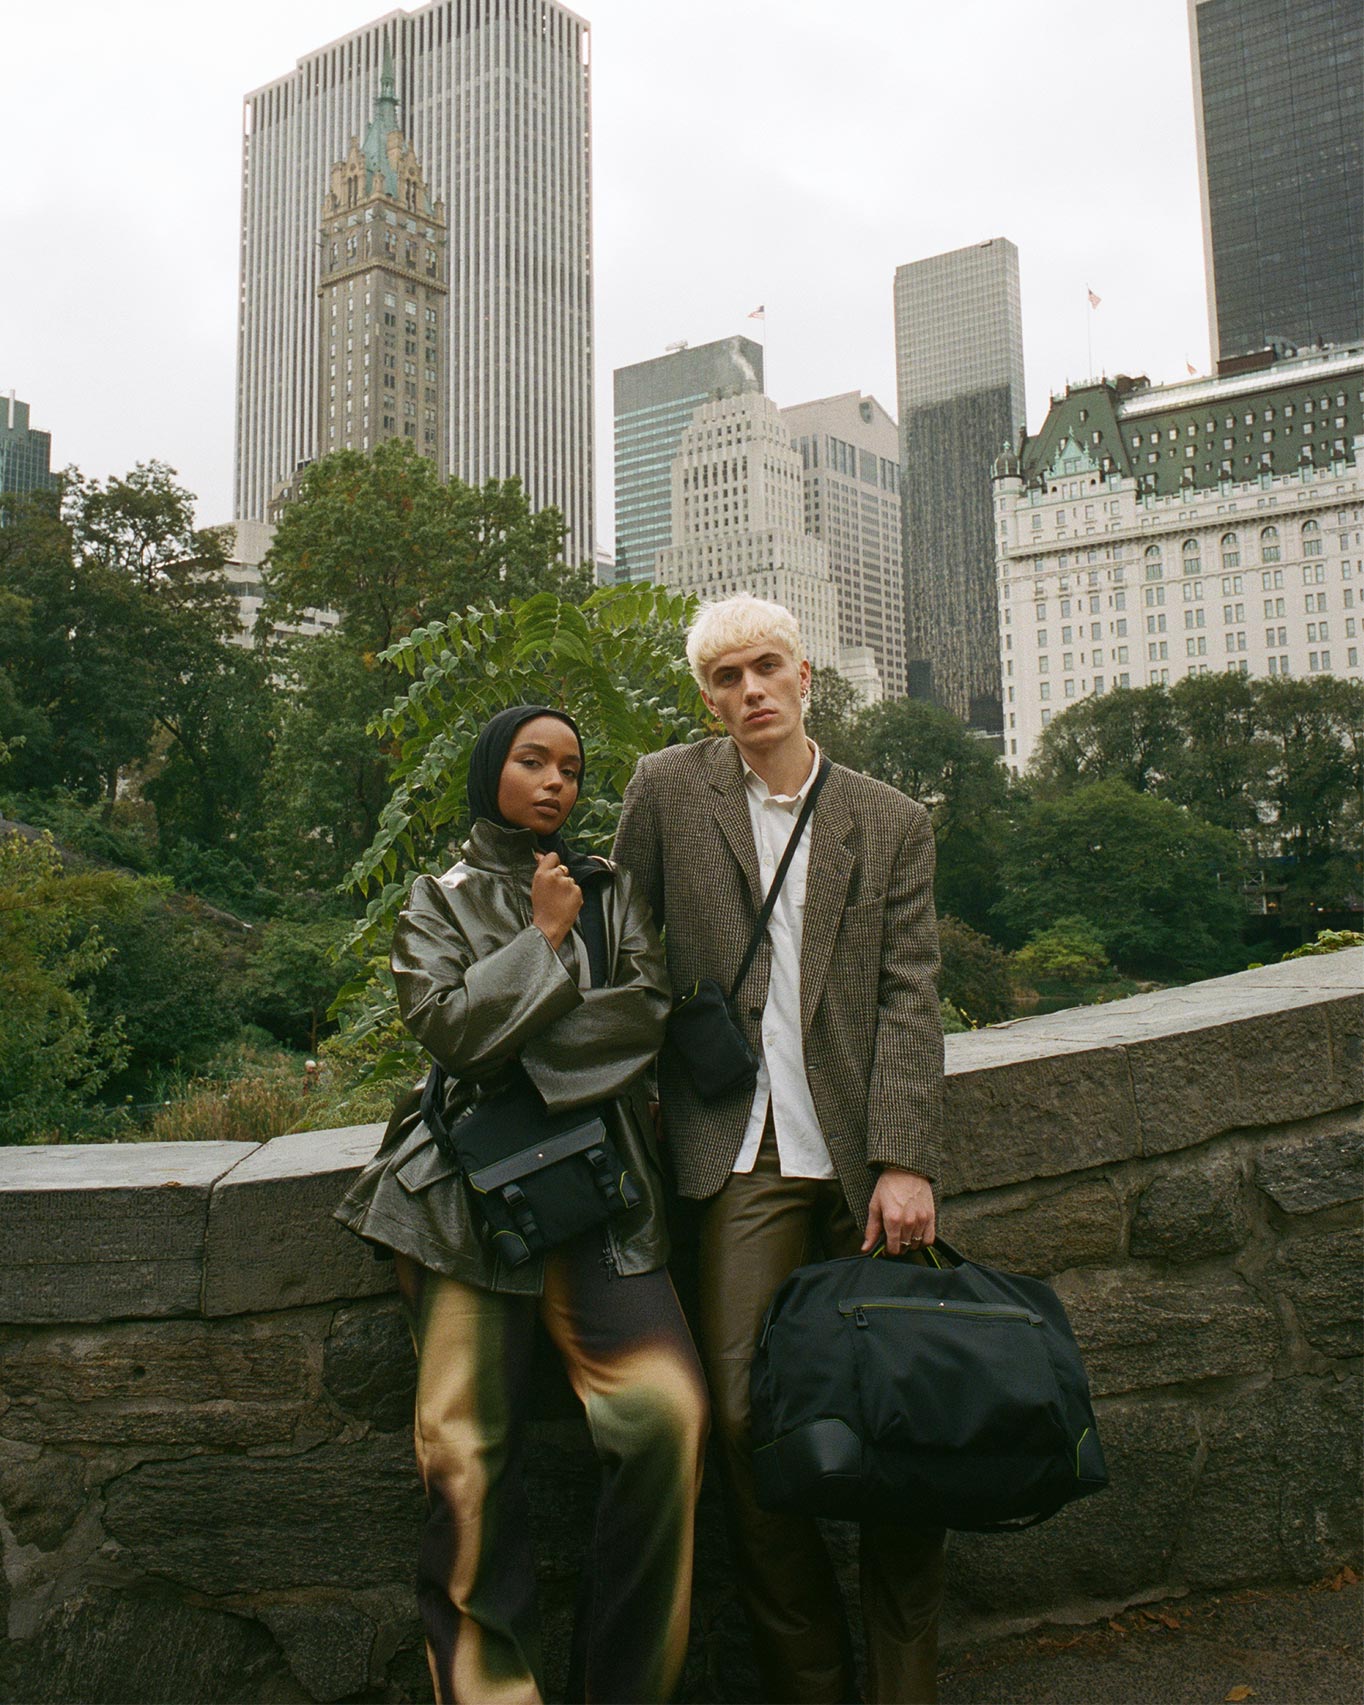 Shahd Batal and Tanner Reese for Montblanc x Public School